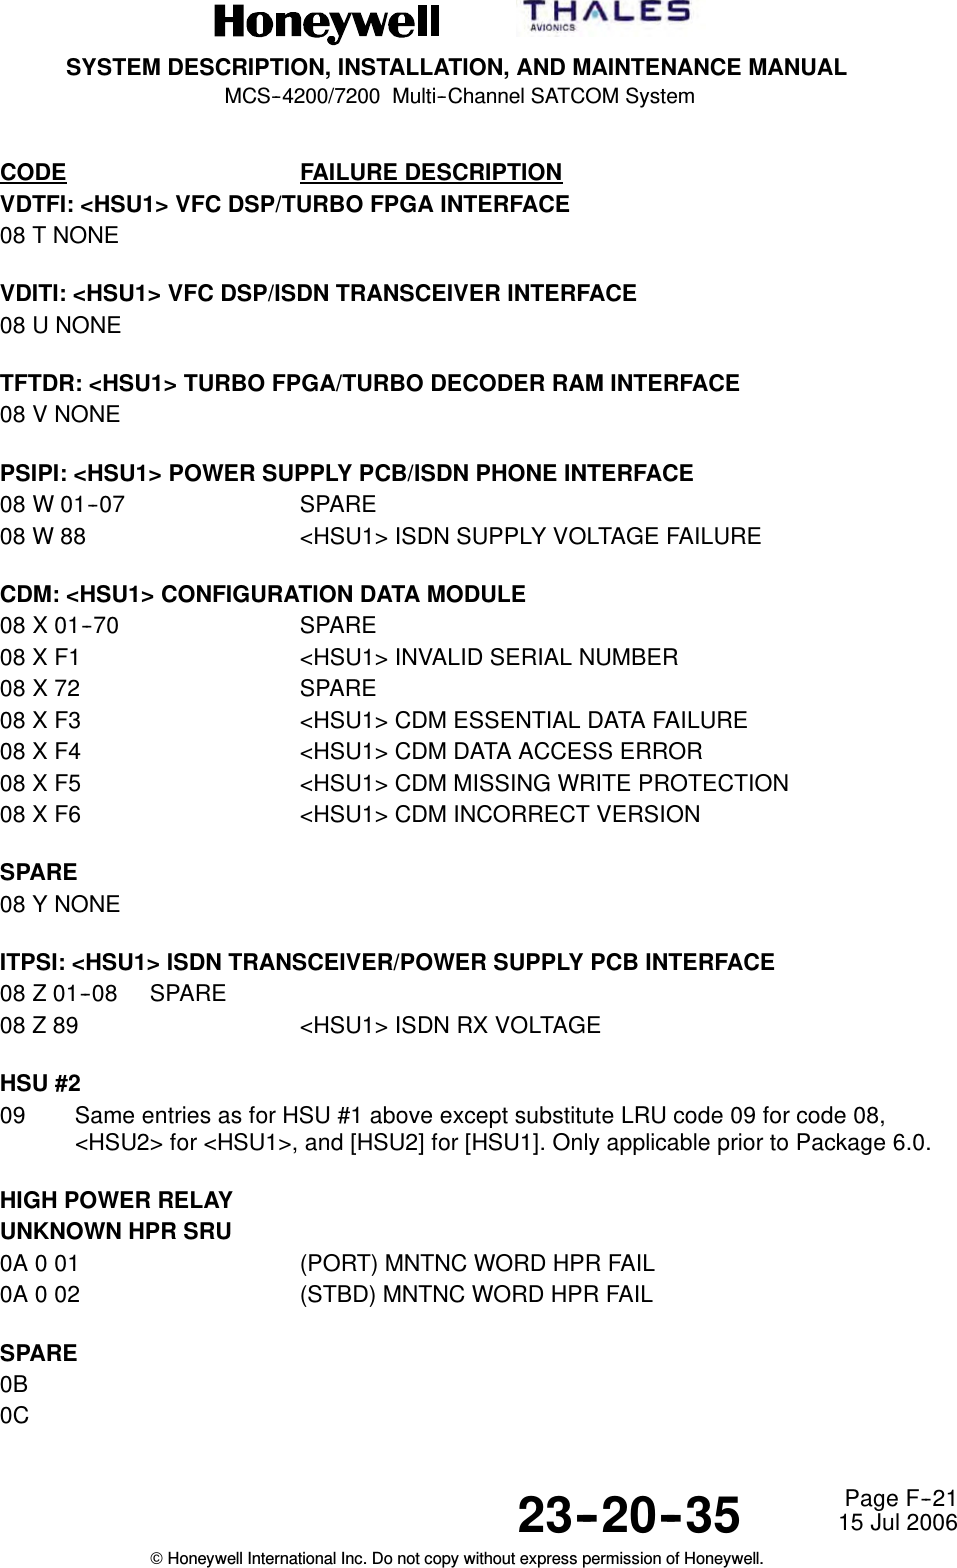 SYSTEM DESCRIPTION, INSTALLATION, AND MAINTENANCE MANUALMCS--4200/7200 Multi--Channel SATCOM System23--20--35 15 Jul 2006Honeywell International Inc. Do not copy without express permission of Honeywell.Page F--21CODE FAILURE DESCRIPTIONVDTFI: &lt;HSU1&gt; VFC DSP/TURBO FPGA INTERFACE08 T NONEVDITI: &lt;HSU1&gt; VFC DSP/ISDN TRANSCEIVER INTERFACE08 U NONETFTDR: &lt;HSU1&gt; TURBO FPGA/TURBO DECODER RAM INTERFACE08 V NONEPSIPI: &lt;HSU1&gt; POWER SUPPLY PCB/ISDN PHONE INTERFACE08 W 01--07 SPARE08 W 88 &lt;HSU1&gt; ISDN SUPPLY VOLTAGE FAILURECDM: &lt;HSU1&gt; CONFIGURATION DATA MODULE08 X 01--70 SPARE08 X F1 &lt;HSU1&gt; INVALID SERIAL NUMBER08 X 72 SPARE08 X F3 &lt;HSU1&gt; CDM ESSENTIAL DATA FAILURE08 X F4 &lt;HSU1&gt; CDM DATA ACCESS ERROR08 X F5 &lt;HSU1&gt; CDM MISSING WRITE PROTECTION08 X F6 &lt;HSU1&gt; CDM INCORRECT VERSIONSPARE08 Y NONEITPSI: &lt;HSU1&gt; ISDN TRANSCEIVER/POWER SUPPLY PCB INTERFACE08 Z 01--08 SPARE08 Z 89 &lt;HSU1&gt; ISDN RX VOLTAGEHSU #209 Same entries as for HSU #1 above except substitute LRU code 09 for code 08,&lt;HSU2&gt; for &lt;HSU1&gt;, and [HSU2] for [HSU1]. Only applicable prior to Package 6.0.HIGH POWER RELAYUNKNOWN HPR SRU0A 0 01 (PORT) MNTNC WORD HPR FAIL0A 0 02 (STBD) MNTNC WORD HPR FAILSPARE0B0C